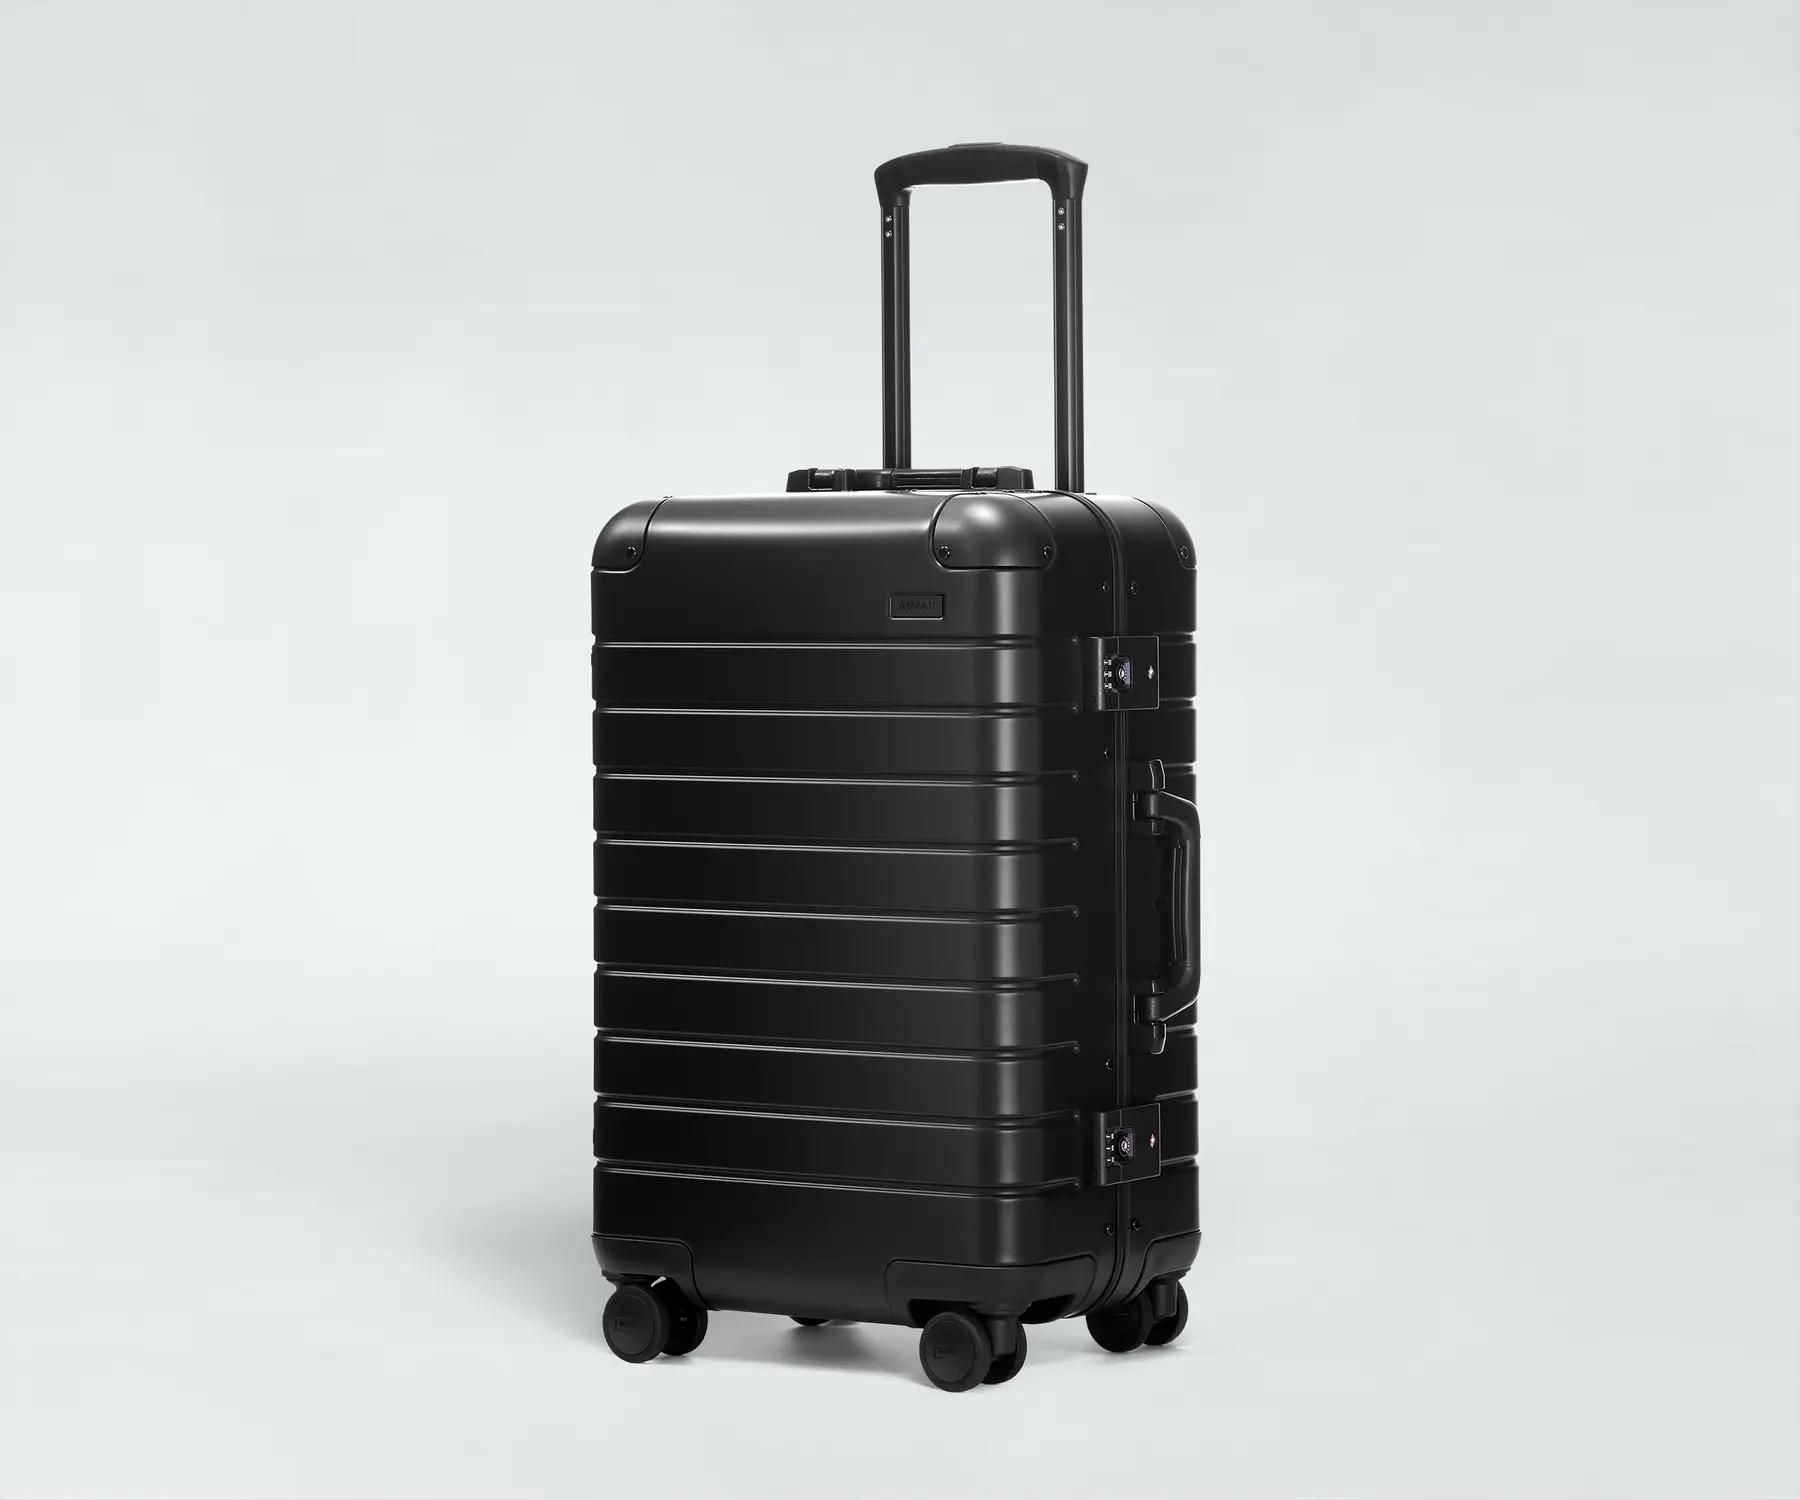 <p><strong>$665.00</strong></p><p>Away burst onto the travel scene in 2015 with a carry-on spinner suitcase that featured an internal Lithium-ion battery—a real game-changer for modern business travelers. Today, Li-ion batteries have proven to be, well, somewhat hazardous and are allowed only in carry-ons—and only under stringent guidelines that usually result in an exhaustive and timely TSA search. Away's battery is now ejectable, making it easy to show to TSA officers or pop out from checked luggage and drop into your carry-on. Unfortunately, it's currently available only in select few suitcases, including <strong>The Bigger Carry-On, Aluminum Edition</strong>. </p><p>Larger and slightly heavier than Away's signature spinners, the Bigger Carry-On is also more durable—and far better-looking, in our eyes. Pricey? Sure. But its convenience, quality, and tech are undeniable for frequent travelers. Not worried about on-the-go charging? The standard <a href="https://go.redirectingat.com?id=74968X1553576&url=https%3A%2F%2Fwww.awaytravel.com%2Fsuitcases%2Fbigger-carry-on-flex%3Fcolor%3Dnavy&sref=https%3A%2F%2Fwww.roadandtrack.com%2Fgear%2Flifestyle%2Fg44130437%2Fbest-luggage-brands%2F">Bigger Carry-on Flex</a> costs about half the price but doesn't offer a battery. Neither does the smaller, lighter, and less expensive <a href="https://go.redirectingat.com?id=74968X1553576&url=https%3A%2F%2Fwww.awaytravel.com%2Fsuitcases%2Fcarry-on-flex%3Fcolor%3Dcoast&sref=https%3A%2F%2Fwww.roadandtrack.com%2Fgear%2Flifestyle%2Fg44130437%2Fbest-luggage-brands%2F">Carry-On Flex</a>. </p><a class="body-btn-link" href="https://www.amazon.com/away-luggage/s?k=away+luggage&tag=syndication-20&ascsubtag=%5Bartid%7C10064.g.44130437%5Bsrc%7Cmsn-us">shop Away at amazon</a>